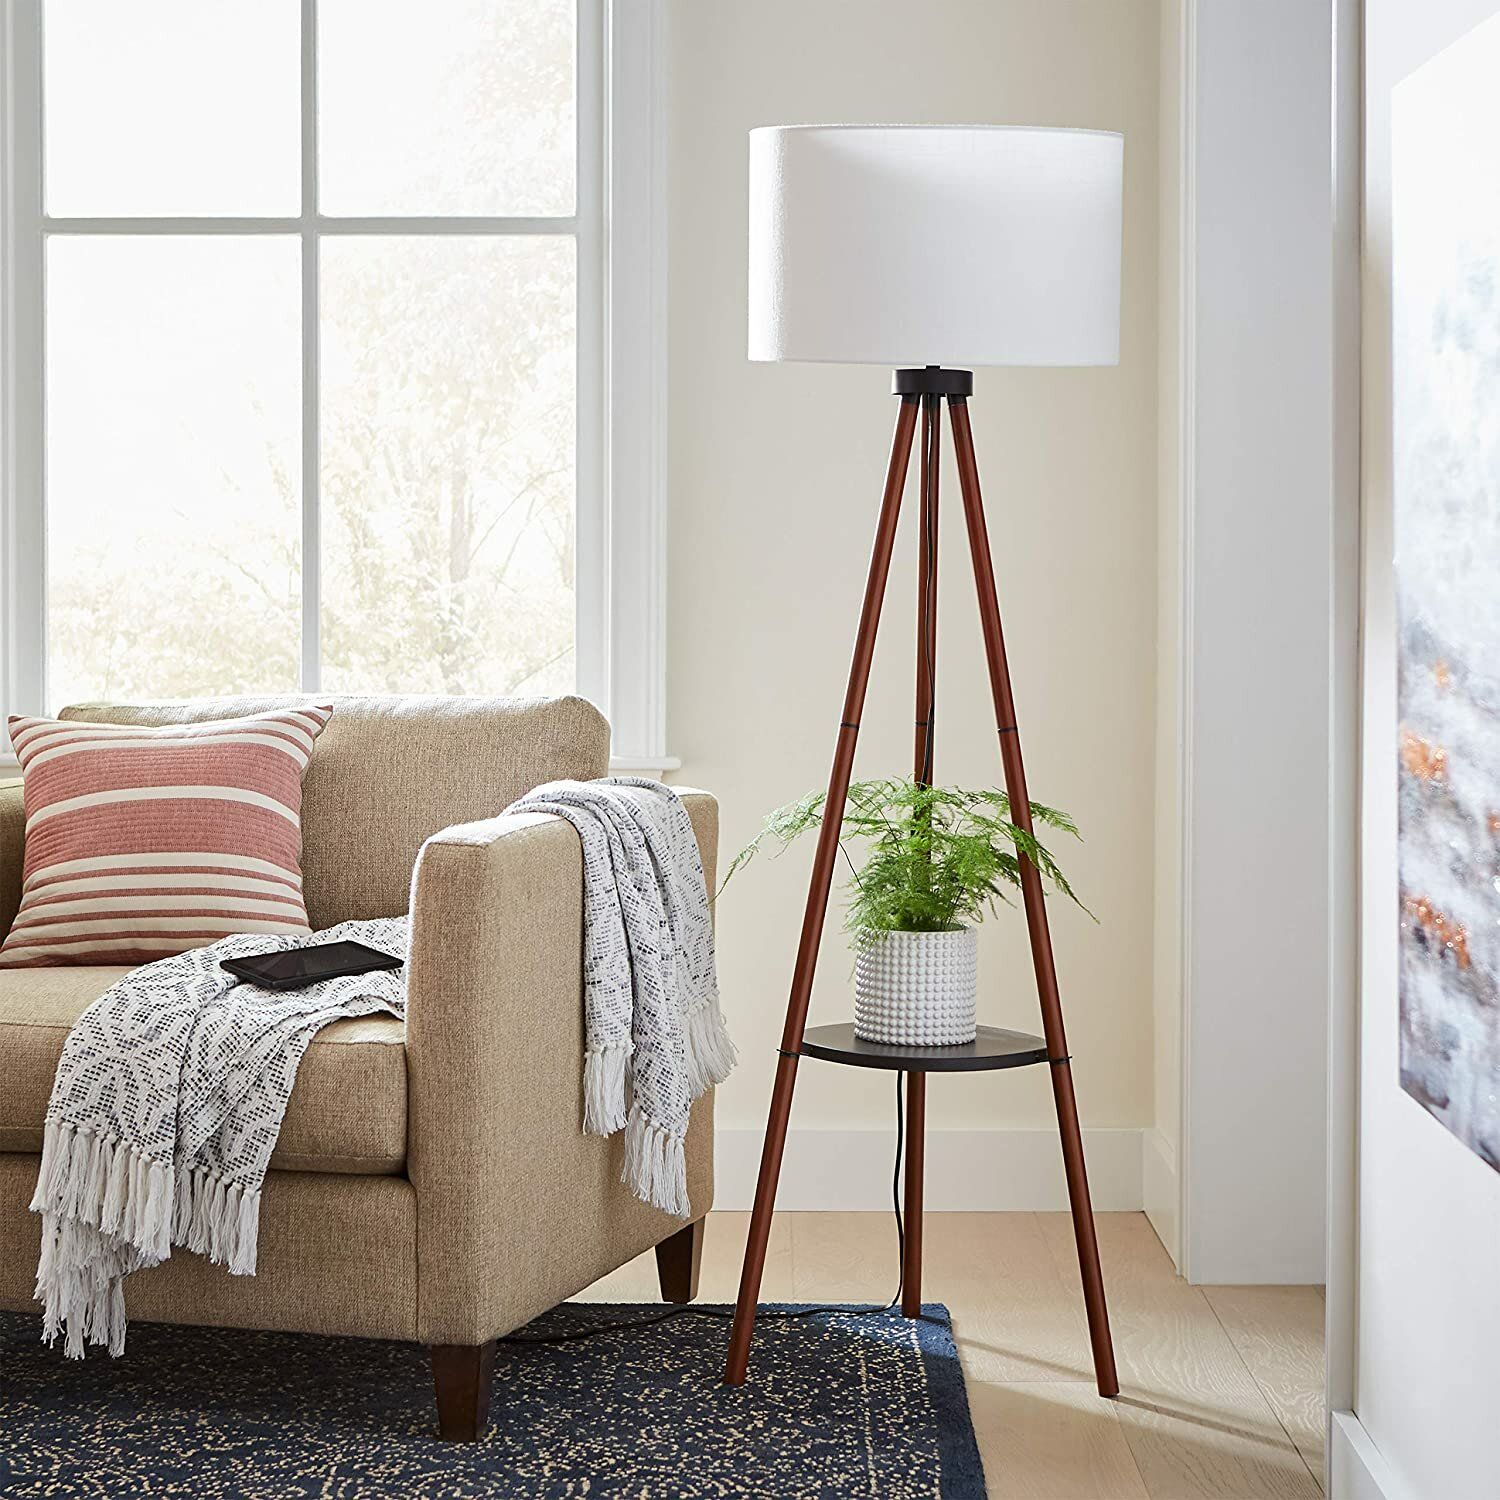 George Oliver Asberry 61" Led Tripod Floor Lamp & Reviews | Wayfair For Wood Tripod Floor Lamps (View 11 of 15)